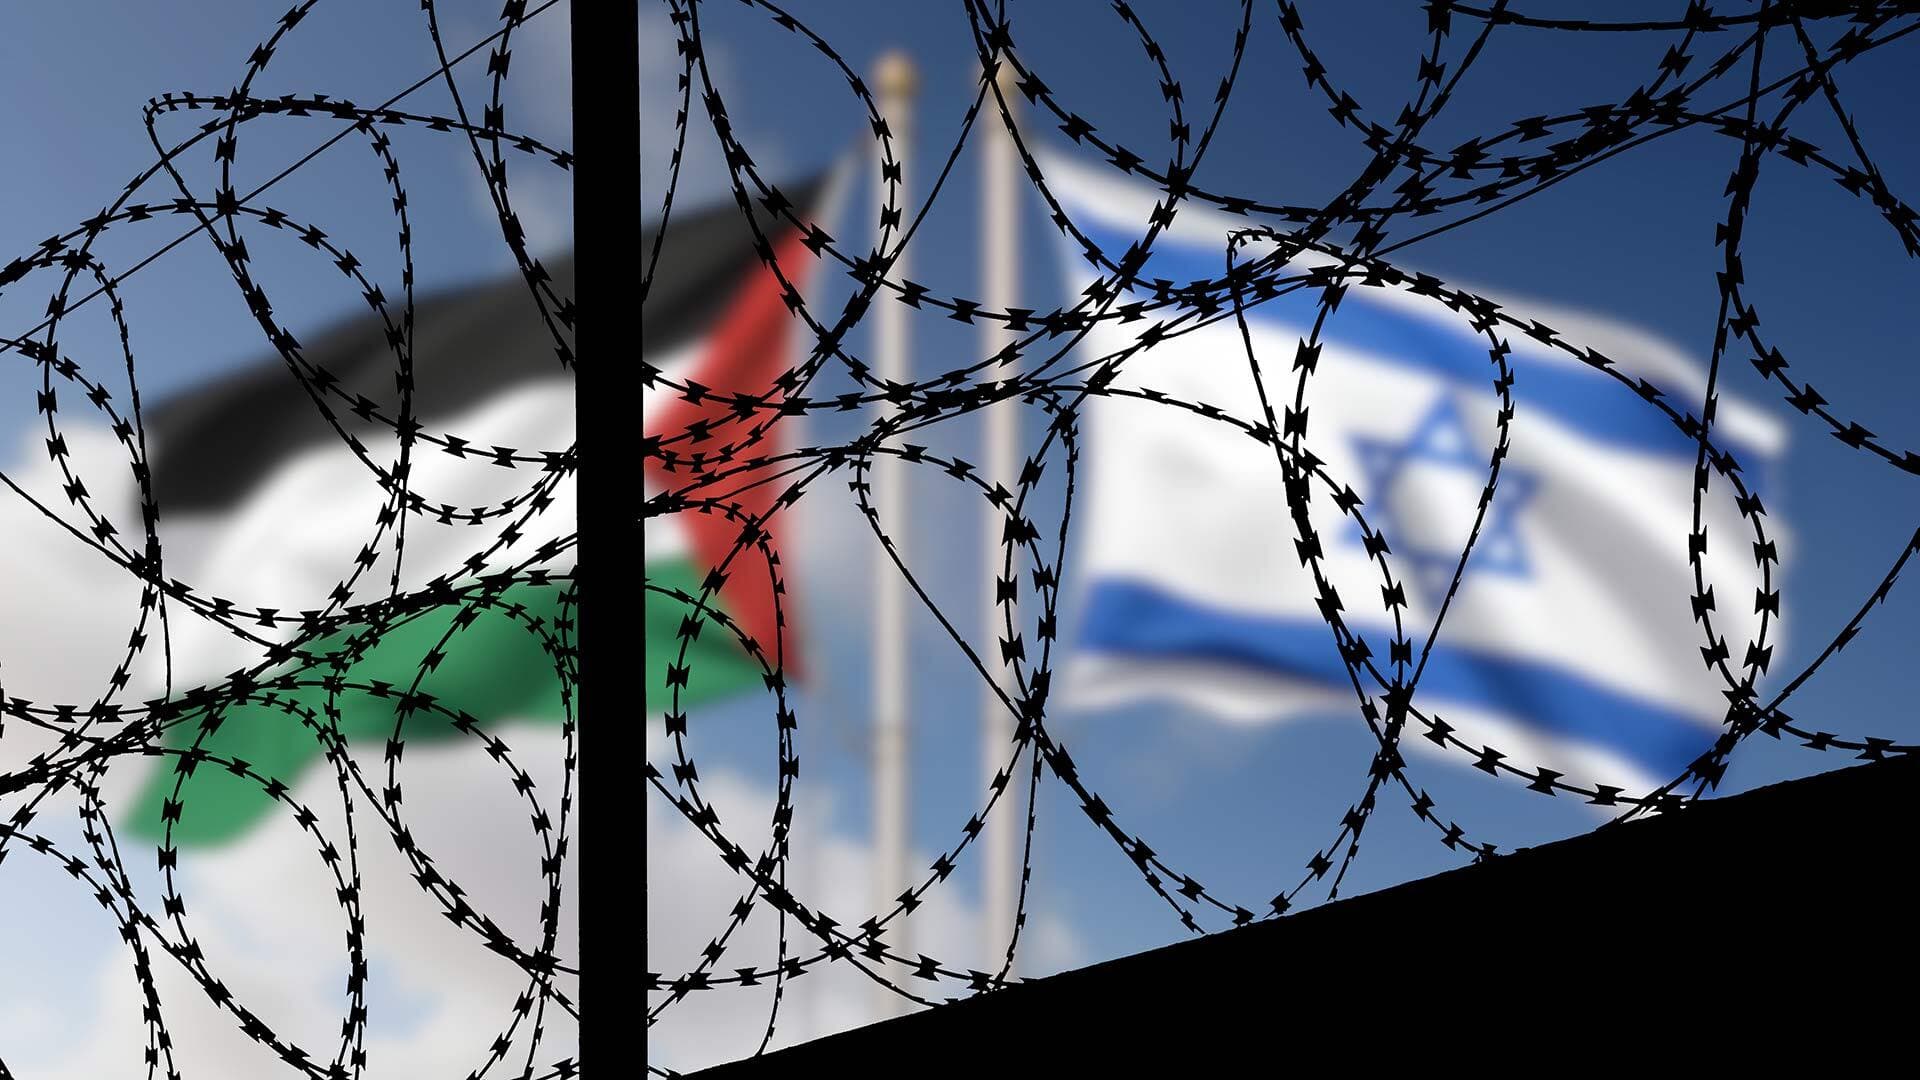 barbed wire fencing with blurry flags for Palestine and Israel in the background